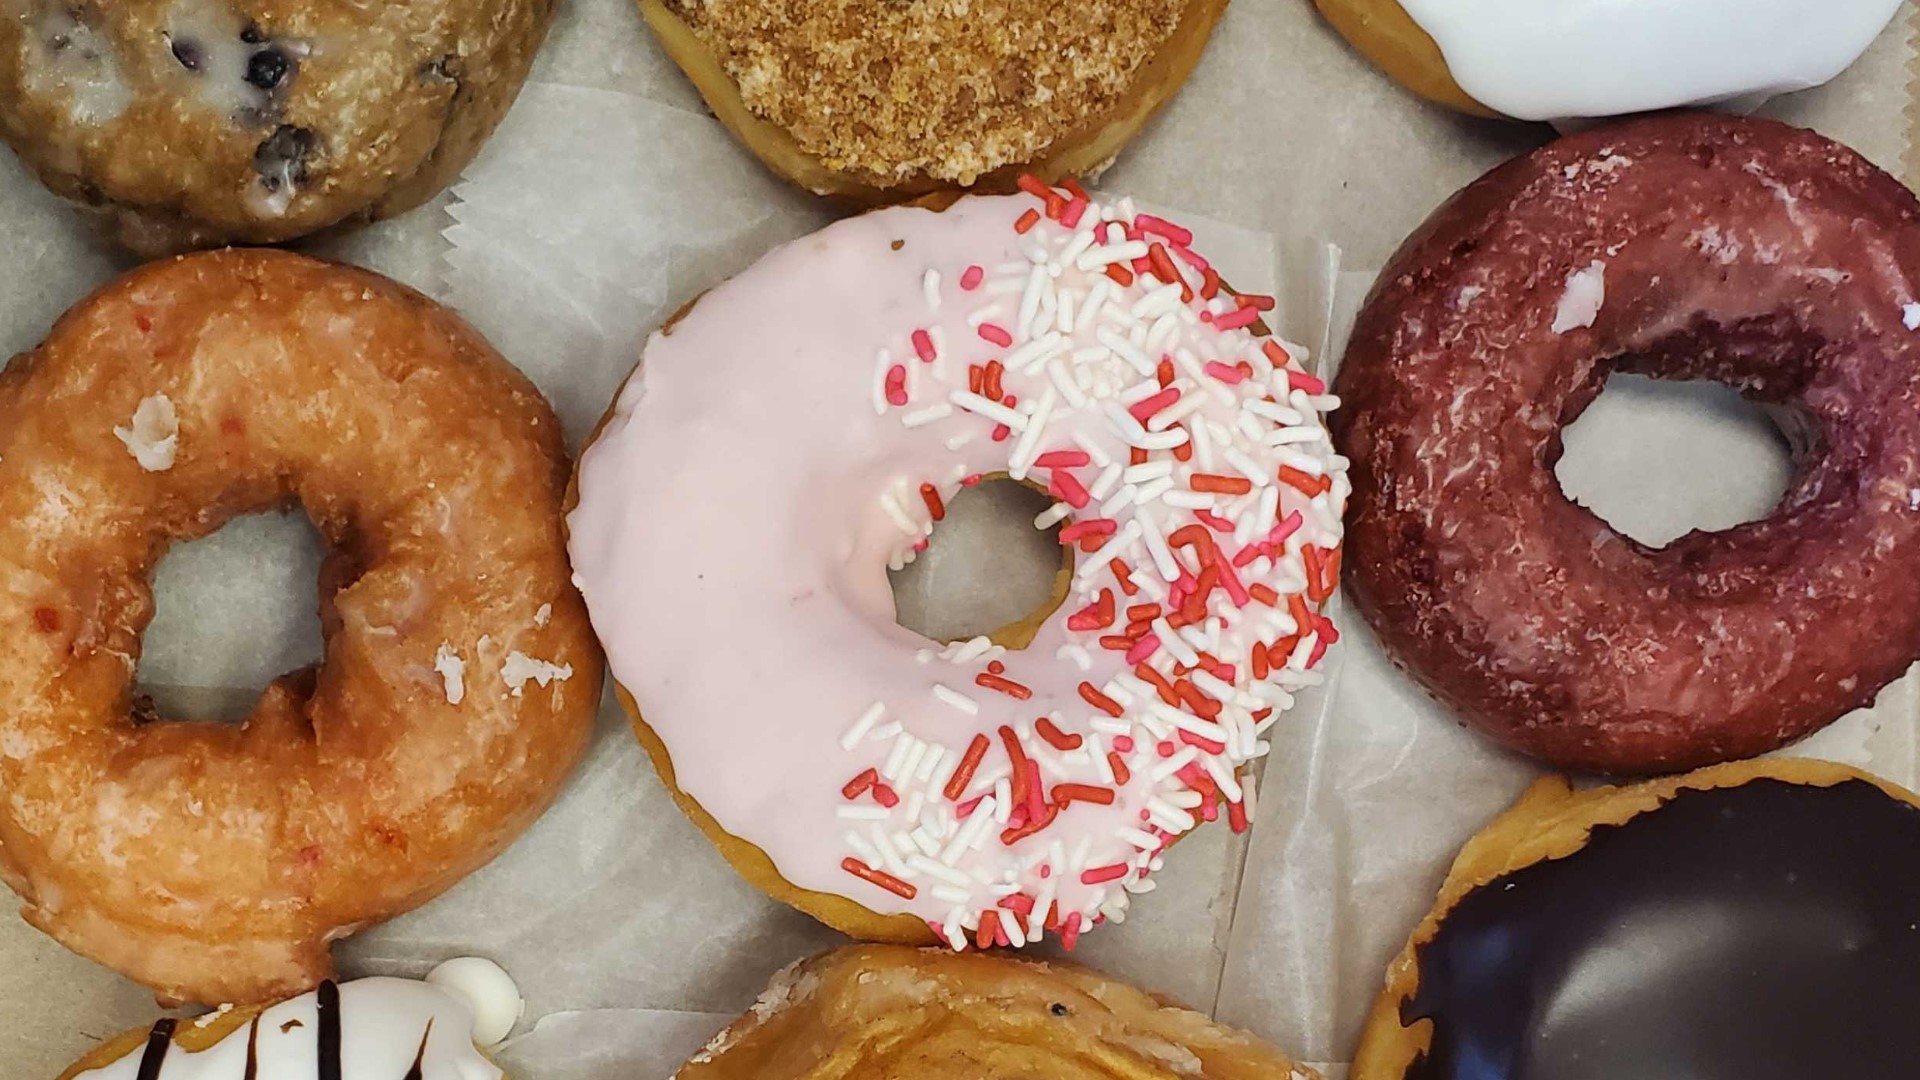 Have a sweet tooth? Here are 6 places around town where you can grab a homemade doughnut.